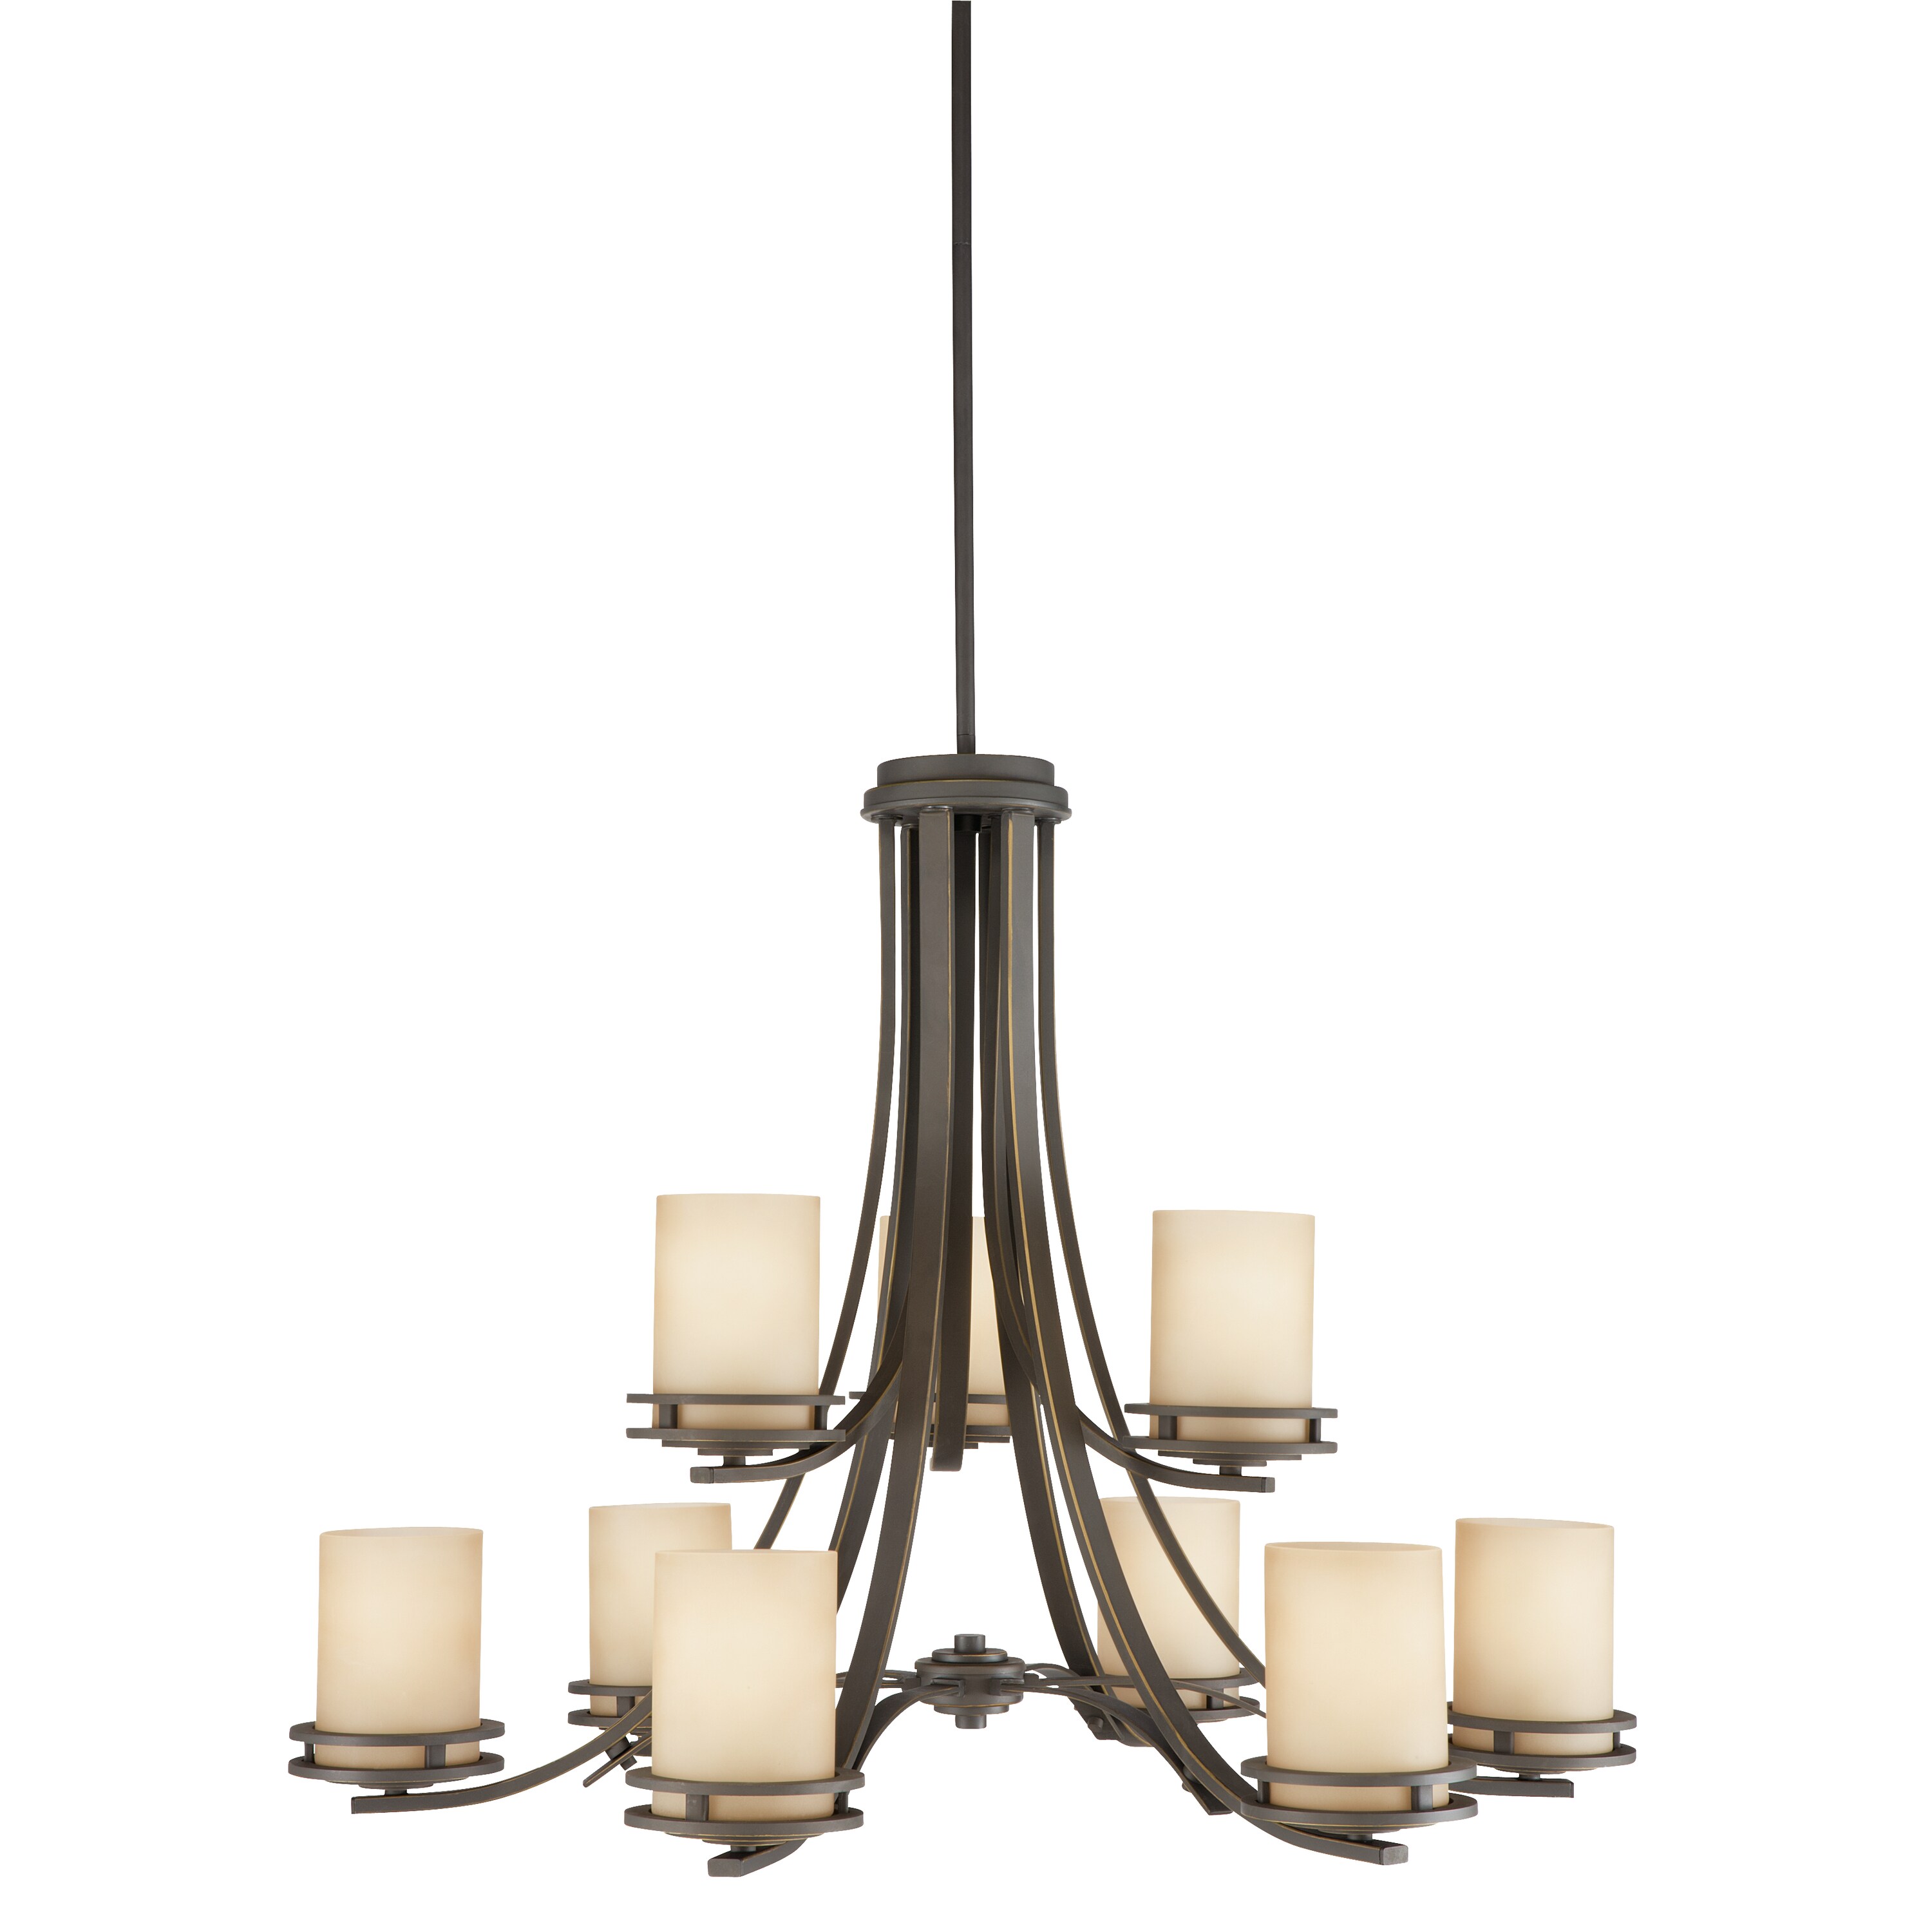 Kichler 10 Light Olde Bronze With Opal Etched Glass Chandelier 